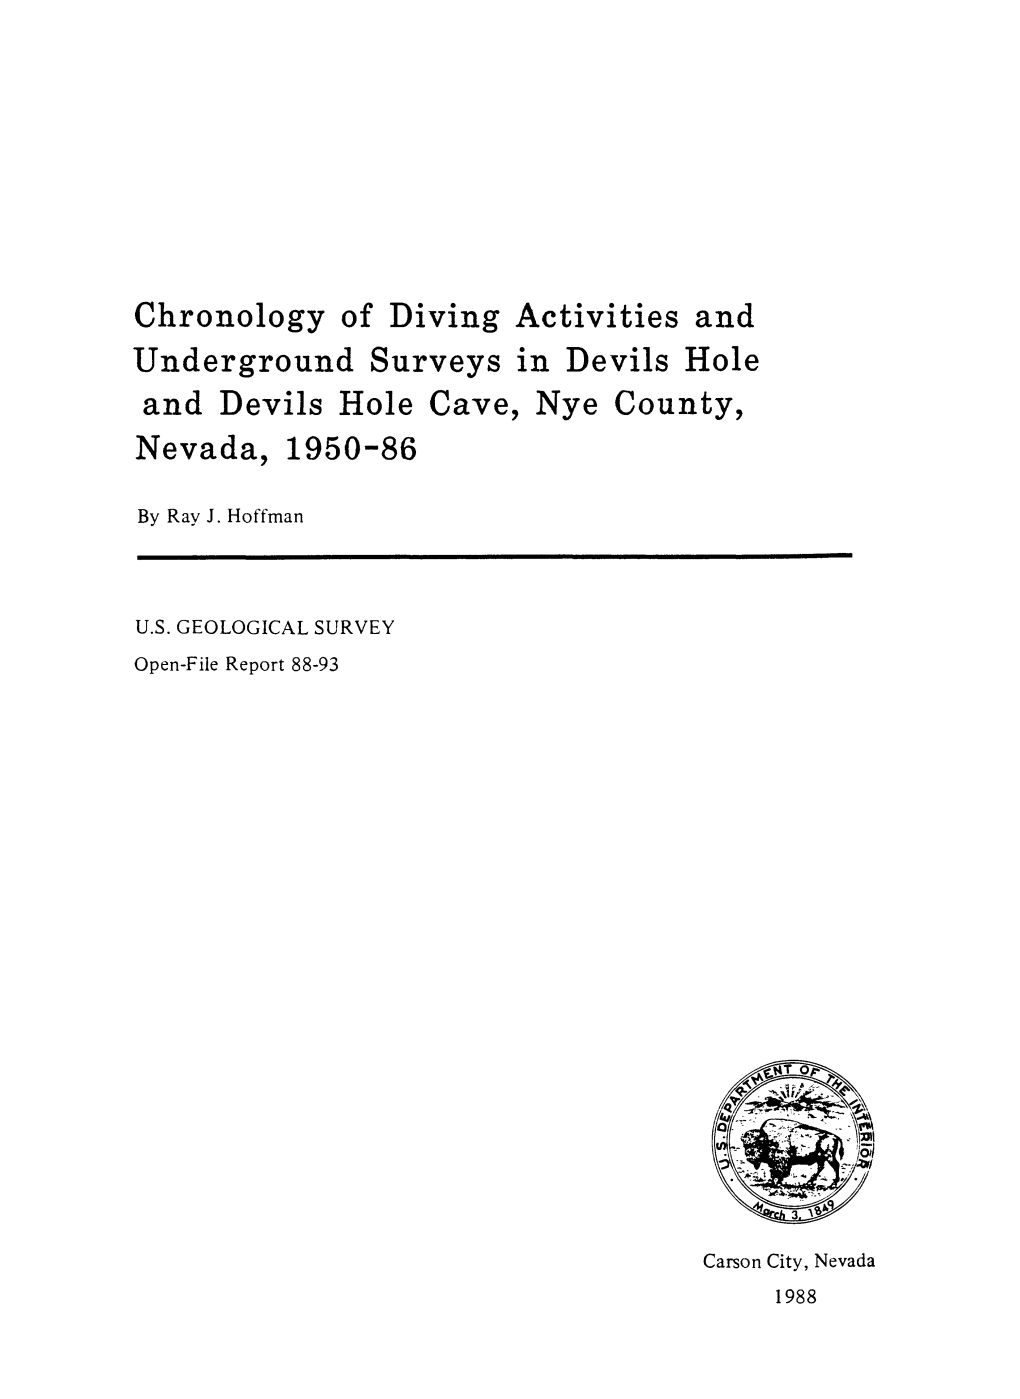 Chronology of Diving Activities and Underground Surveys in Devils Hole and Devils Hole Cave, Nye County, Nevada, 1950-86